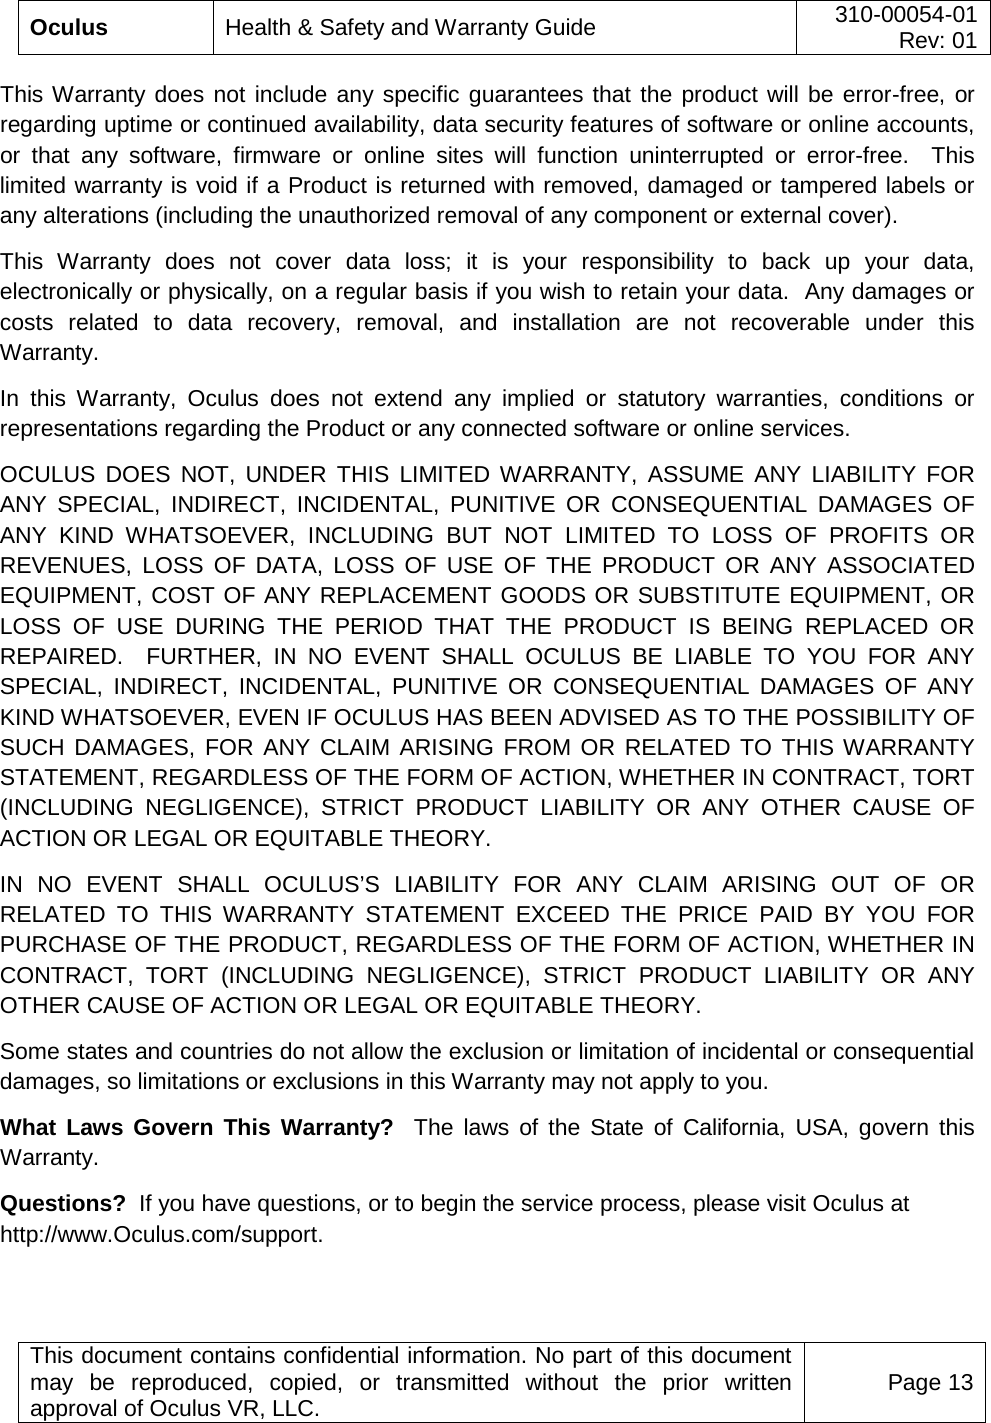  Oculus Health &amp; Safety and Warranty Guide 310-00054-01  Rev: 01   This document contains confidential information. No part of this document may be reproduced, copied, or transmitted without the prior written approval of Oculus VR, LLC. Page 13  This Warranty does not include any specific guarantees that the product will be error-free, or regarding uptime or continued availability, data security features of software or online accounts, or that any software, firmware or online sites will function uninterrupted or error-free.  This limited warranty is void if a Product is returned with removed, damaged or tampered labels or any alterations (including the unauthorized removal of any component or external cover).   This Warranty does not cover data loss; it is your responsibility to back up your data, electronically or physically, on a regular basis if you wish to retain your data.  Any damages or costs related to data recovery, removal, and installation are not recoverable under this Warranty.   In this Warranty, Oculus does not extend any implied or statutory warranties, conditions or representations regarding the Product or any connected software or online services. OCULUS DOES NOT, UNDER THIS LIMITED WARRANTY, ASSUME ANY LIABILITY FOR ANY SPECIAL, INDIRECT, INCIDENTAL, PUNITIVE OR CONSEQUENTIAL DAMAGES OF ANY KIND WHATSOEVER, INCLUDING BUT NOT LIMITED TO LOSS OF PROFITS OR REVENUES, LOSS OF DATA, LOSS OF USE OF THE PRODUCT OR ANY ASSOCIATED EQUIPMENT, COST OF ANY REPLACEMENT GOODS OR SUBSTITUTE EQUIPMENT, OR LOSS OF USE DURING THE PERIOD THAT THE PRODUCT IS BEING REPLACED OR REPAIRED.  FURTHER, IN NO EVENT SHALL OCULUS BE LIABLE TO YOU FOR ANY SPECIAL, INDIRECT, INCIDENTAL, PUNITIVE OR CONSEQUENTIAL DAMAGES OF ANY KIND WHATSOEVER, EVEN IF OCULUS HAS BEEN ADVISED AS TO THE POSSIBILITY OF SUCH DAMAGES, FOR ANY CLAIM ARISING FROM OR RELATED TO THIS WARRANTY STATEMENT, REGARDLESS OF THE FORM OF ACTION, WHETHER IN CONTRACT, TORT (INCLUDING NEGLIGENCE), STRICT PRODUCT LIABILITY OR ANY OTHER CAUSE OF ACTION OR LEGAL OR EQUITABLE THEORY.   IN NO EVENT SHALL OCULUS’S LIABILITY FOR ANY CLAIM ARISING OUT OF OR RELATED TO THIS WARRANTY STATEMENT EXCEED THE PRICE PAID BY YOU FOR PURCHASE OF THE PRODUCT, REGARDLESS OF THE FORM OF ACTION, WHETHER IN CONTRACT, TORT (INCLUDING NEGLIGENCE), STRICT PRODUCT LIABILITY OR ANY OTHER CAUSE OF ACTION OR LEGAL OR EQUITABLE THEORY. Some states and countries do not allow the exclusion or limitation of incidental or consequential damages, so limitations or exclusions in this Warranty may not apply to you.  What Laws Govern This Warranty?  The laws of the State of California, USA, govern this Warranty.   Questions?  If you have questions, or to begin the service process, please visit Oculus at http://www.Oculus.com/support.     